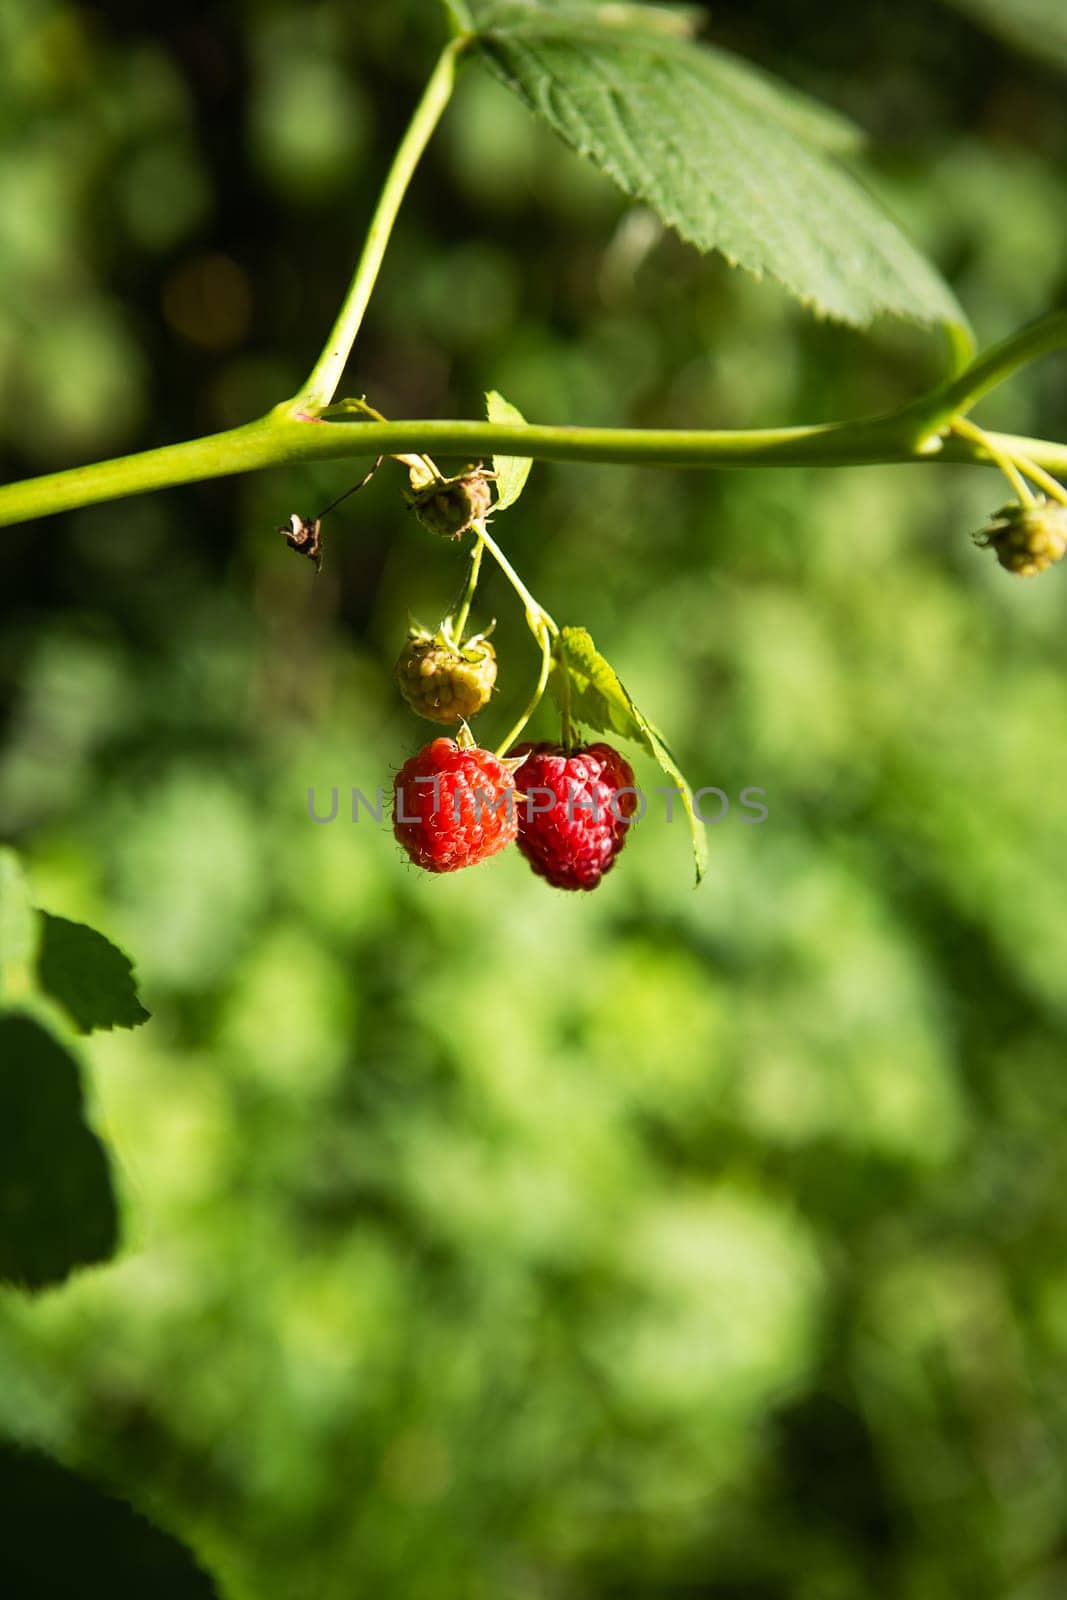 A very ripe and unripe raspberry hanging from a branch, shot in close-up. Sunny summer day, close-up